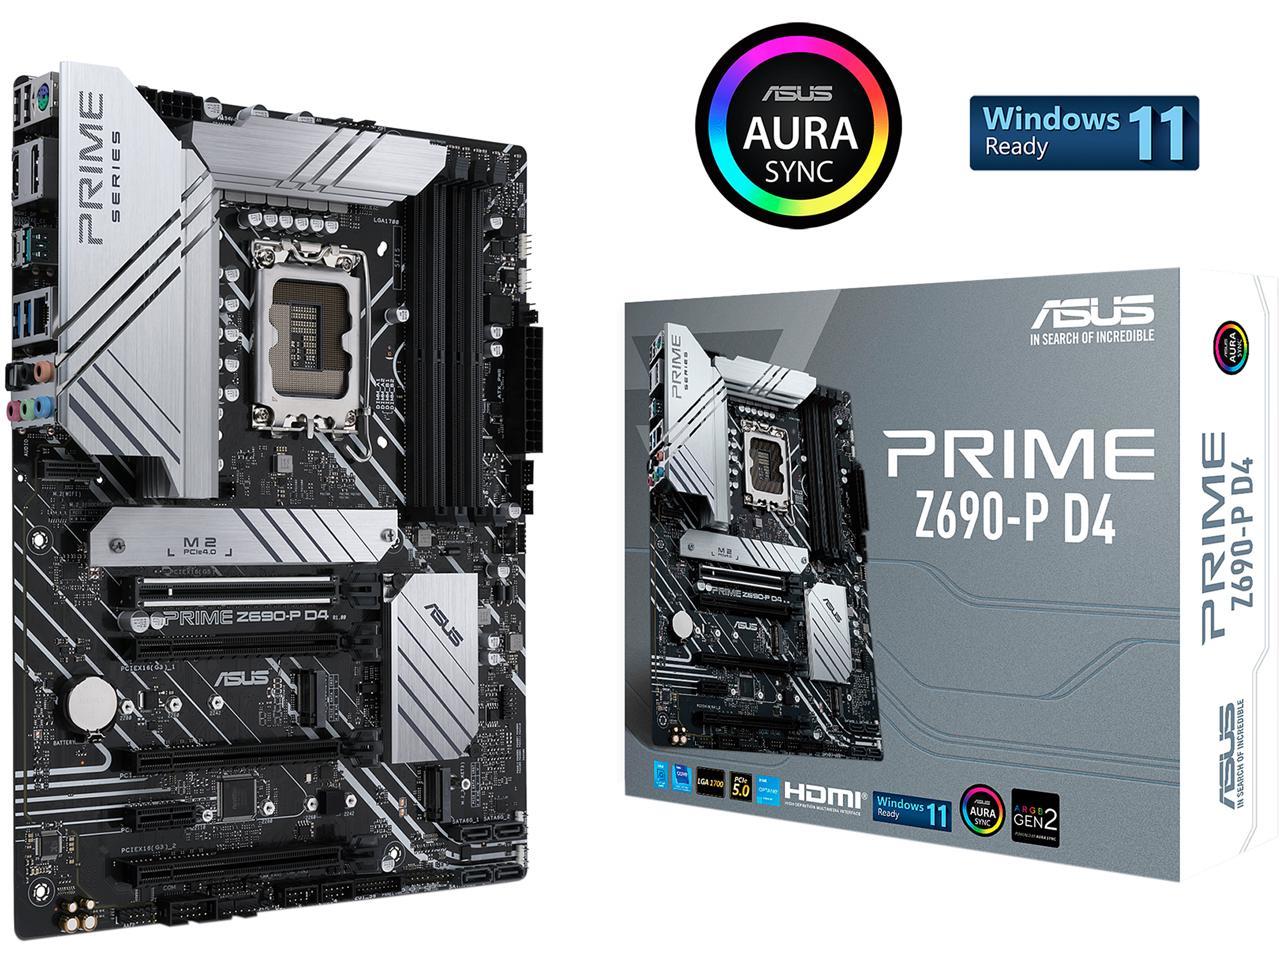 pattern Mindful Specialist ASUS Prime Z690-P D4 LGA 1700 (Intel® 12th&13th Gen) ATX motherboard (PCIe  5.0,DDR4,14+1 Power Stages, 3x M.2,2.5Gb LAN,V-M.2 e-key,front panel USB  3.2 Gen 1 USB Type-C®,Thunderbolt™ 4 support) - Newegg.com